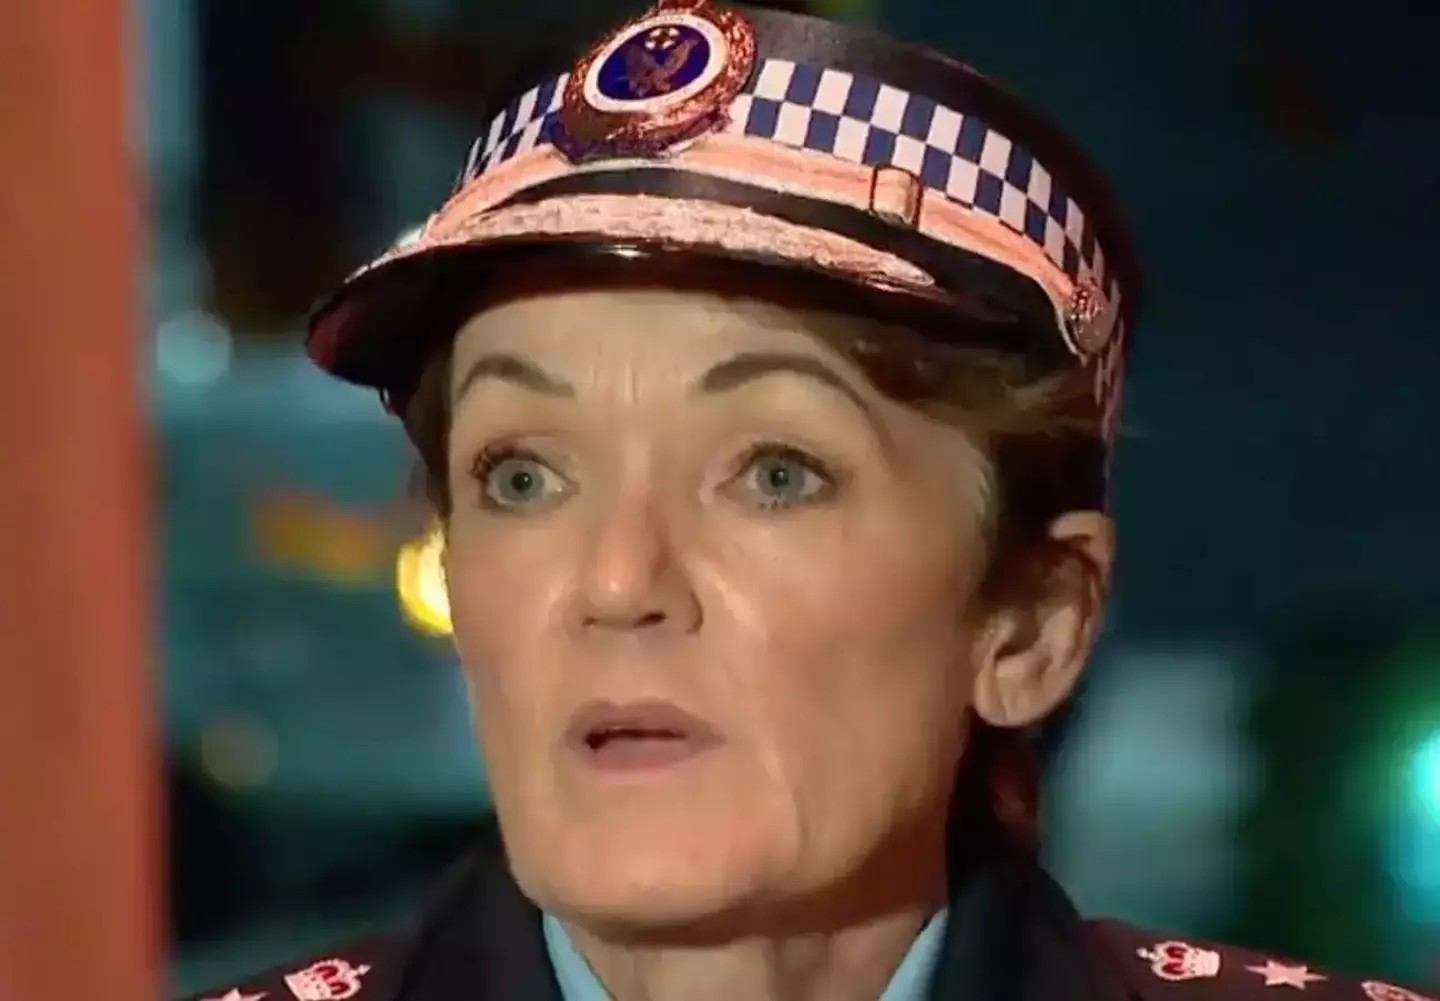 The NSW commissioner confirmed that White had been suspended.